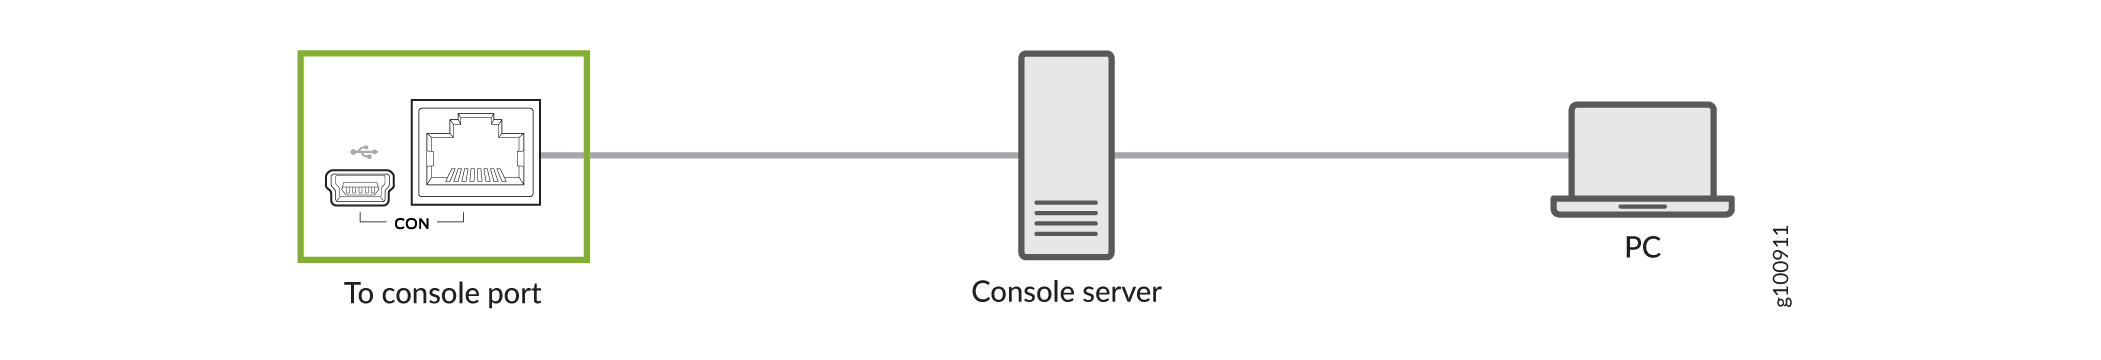 Connecting the CTP151 Device to a Management Console Through a Console Server